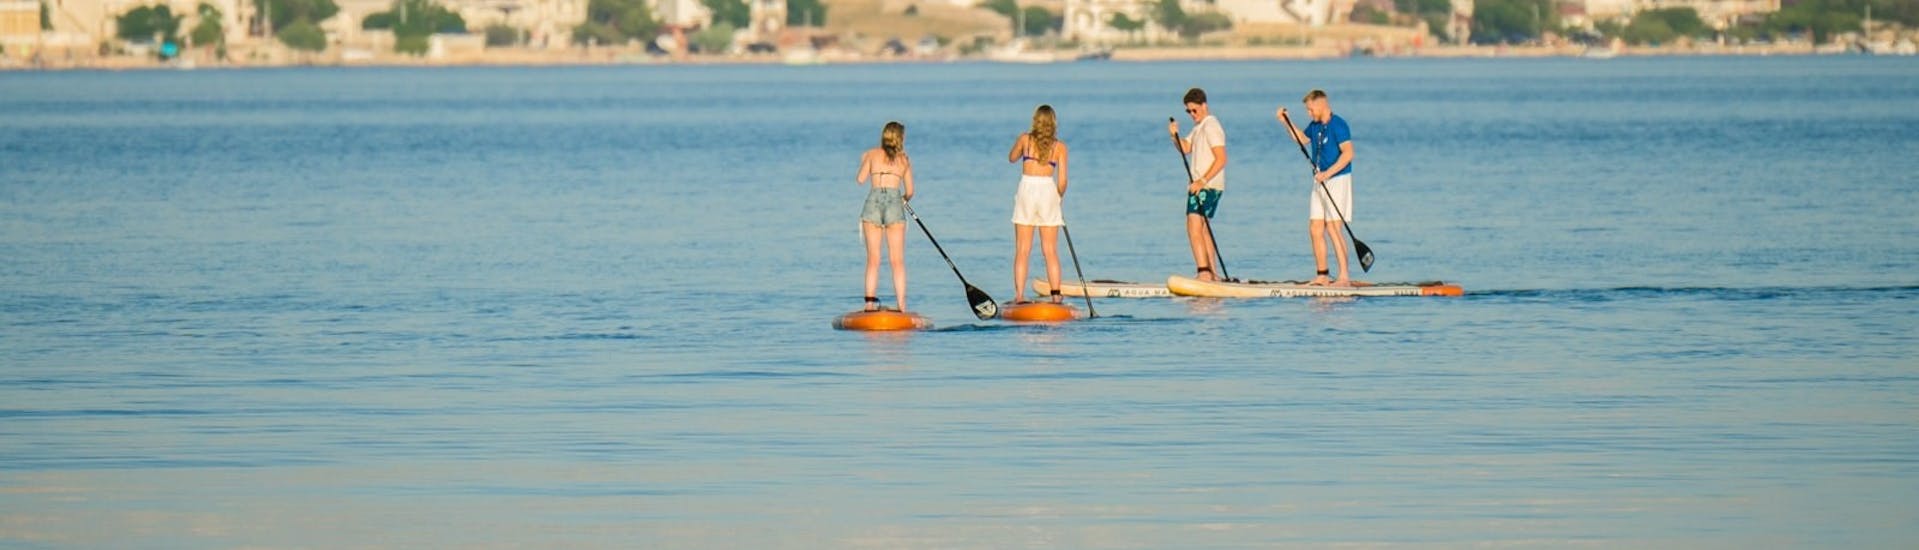 Two guys and 2 girls supping during the SUP Tour to Zrce Beach and Tunera from Sunturist Novalja.